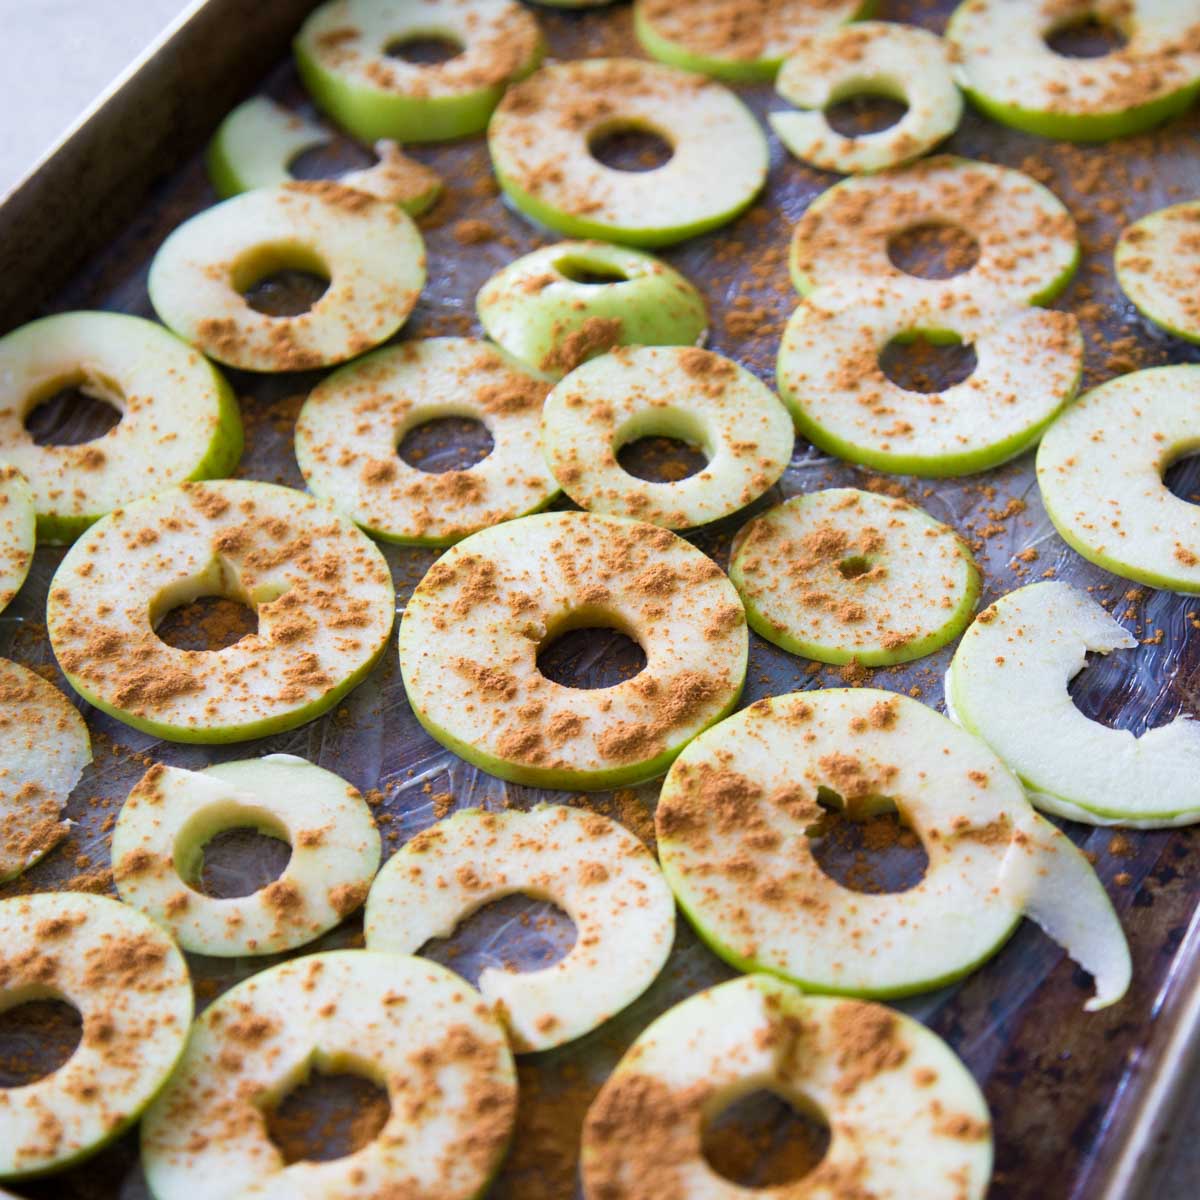 A baking pan has thinly sliced apple circles sprinkled with cinnamon ready for baking.